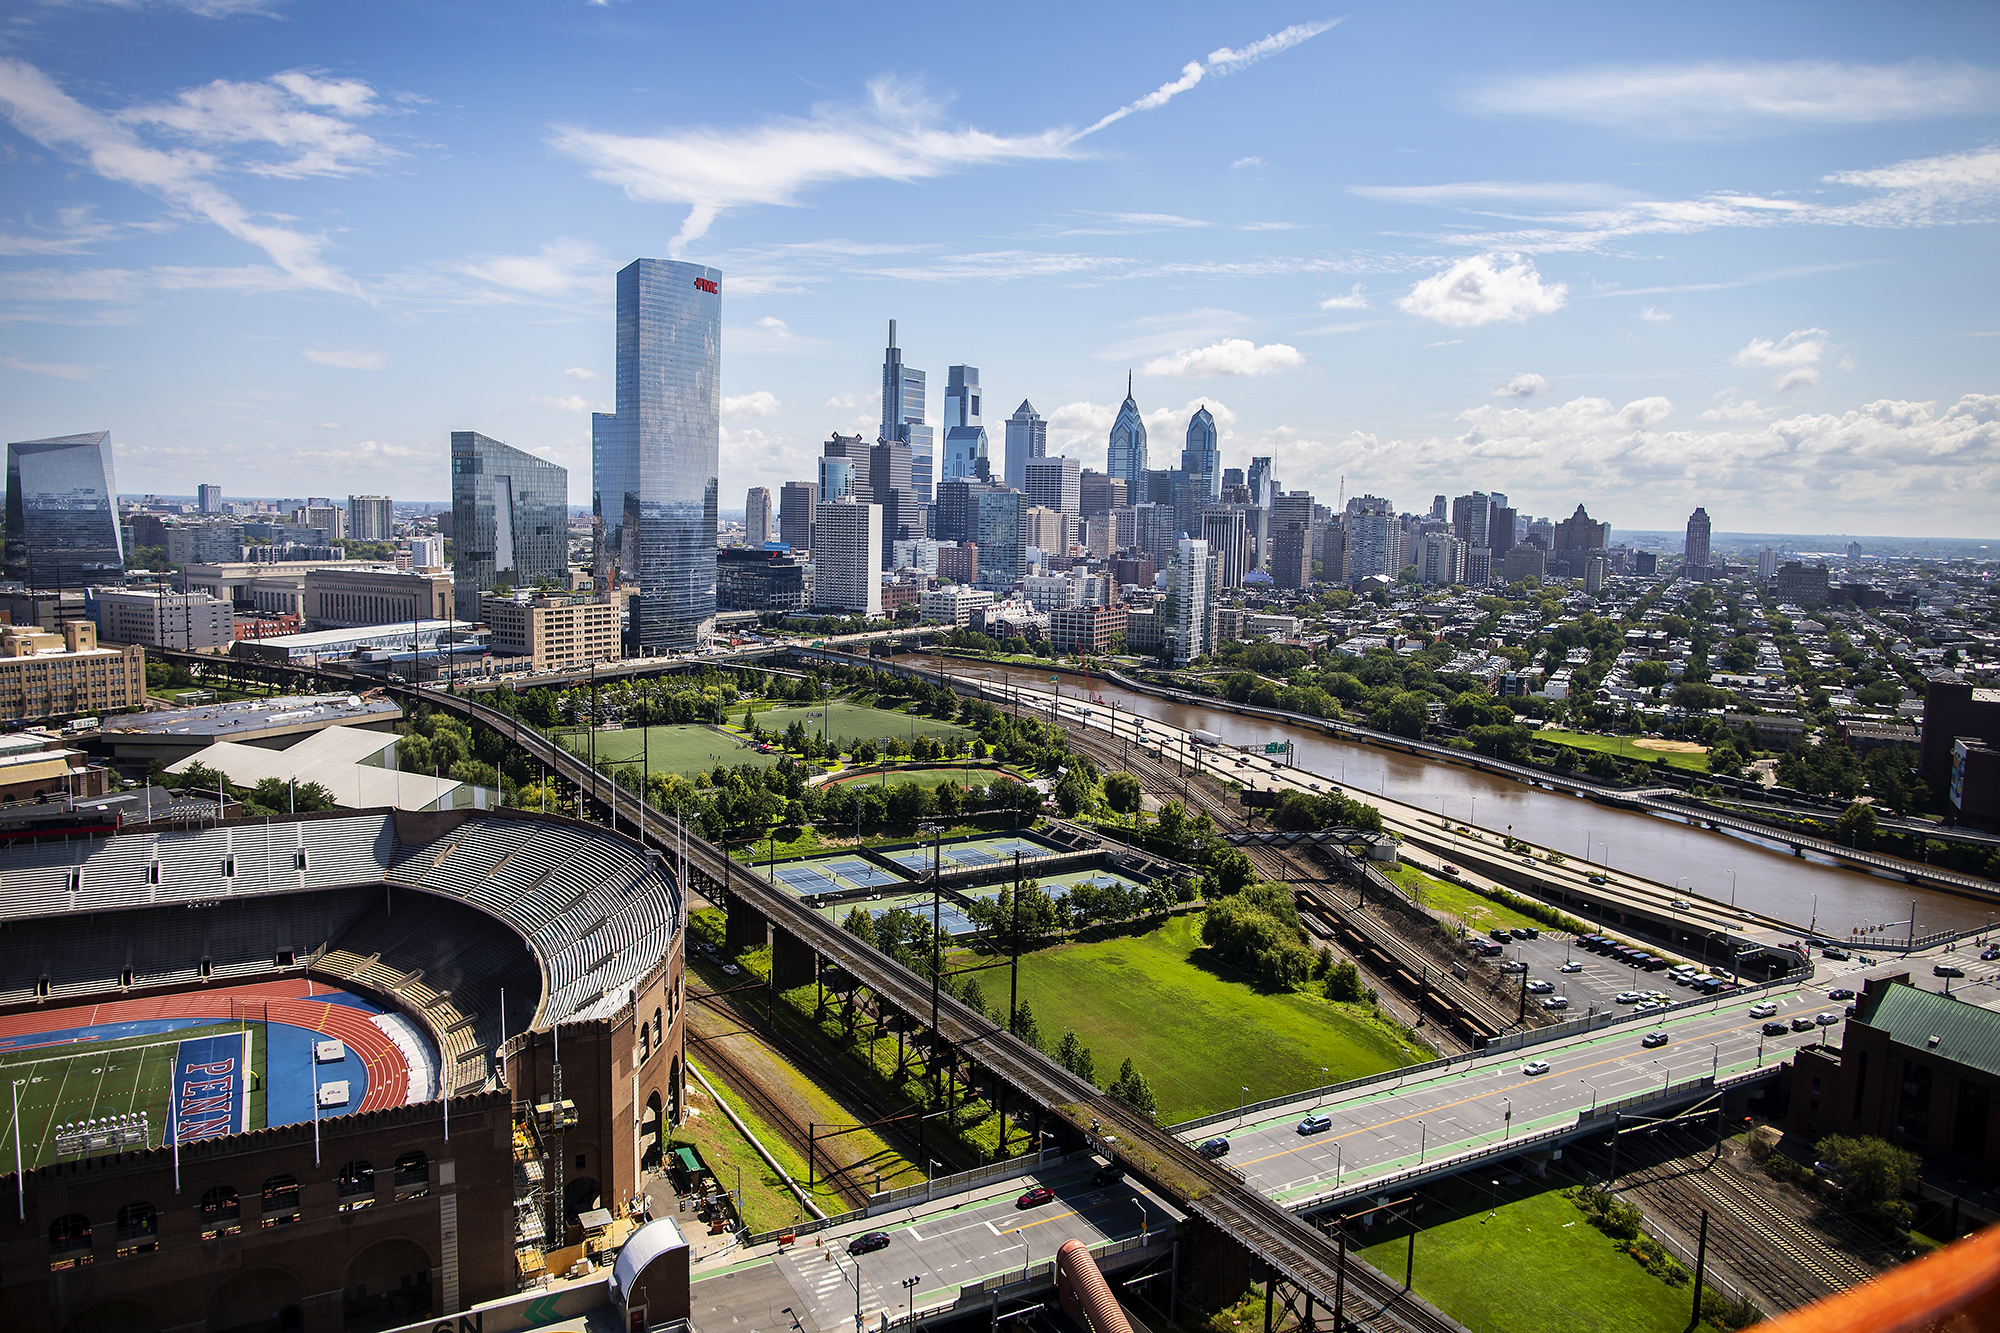 Franklin Field and Penn Park with the Philadelphia skyline in the background.